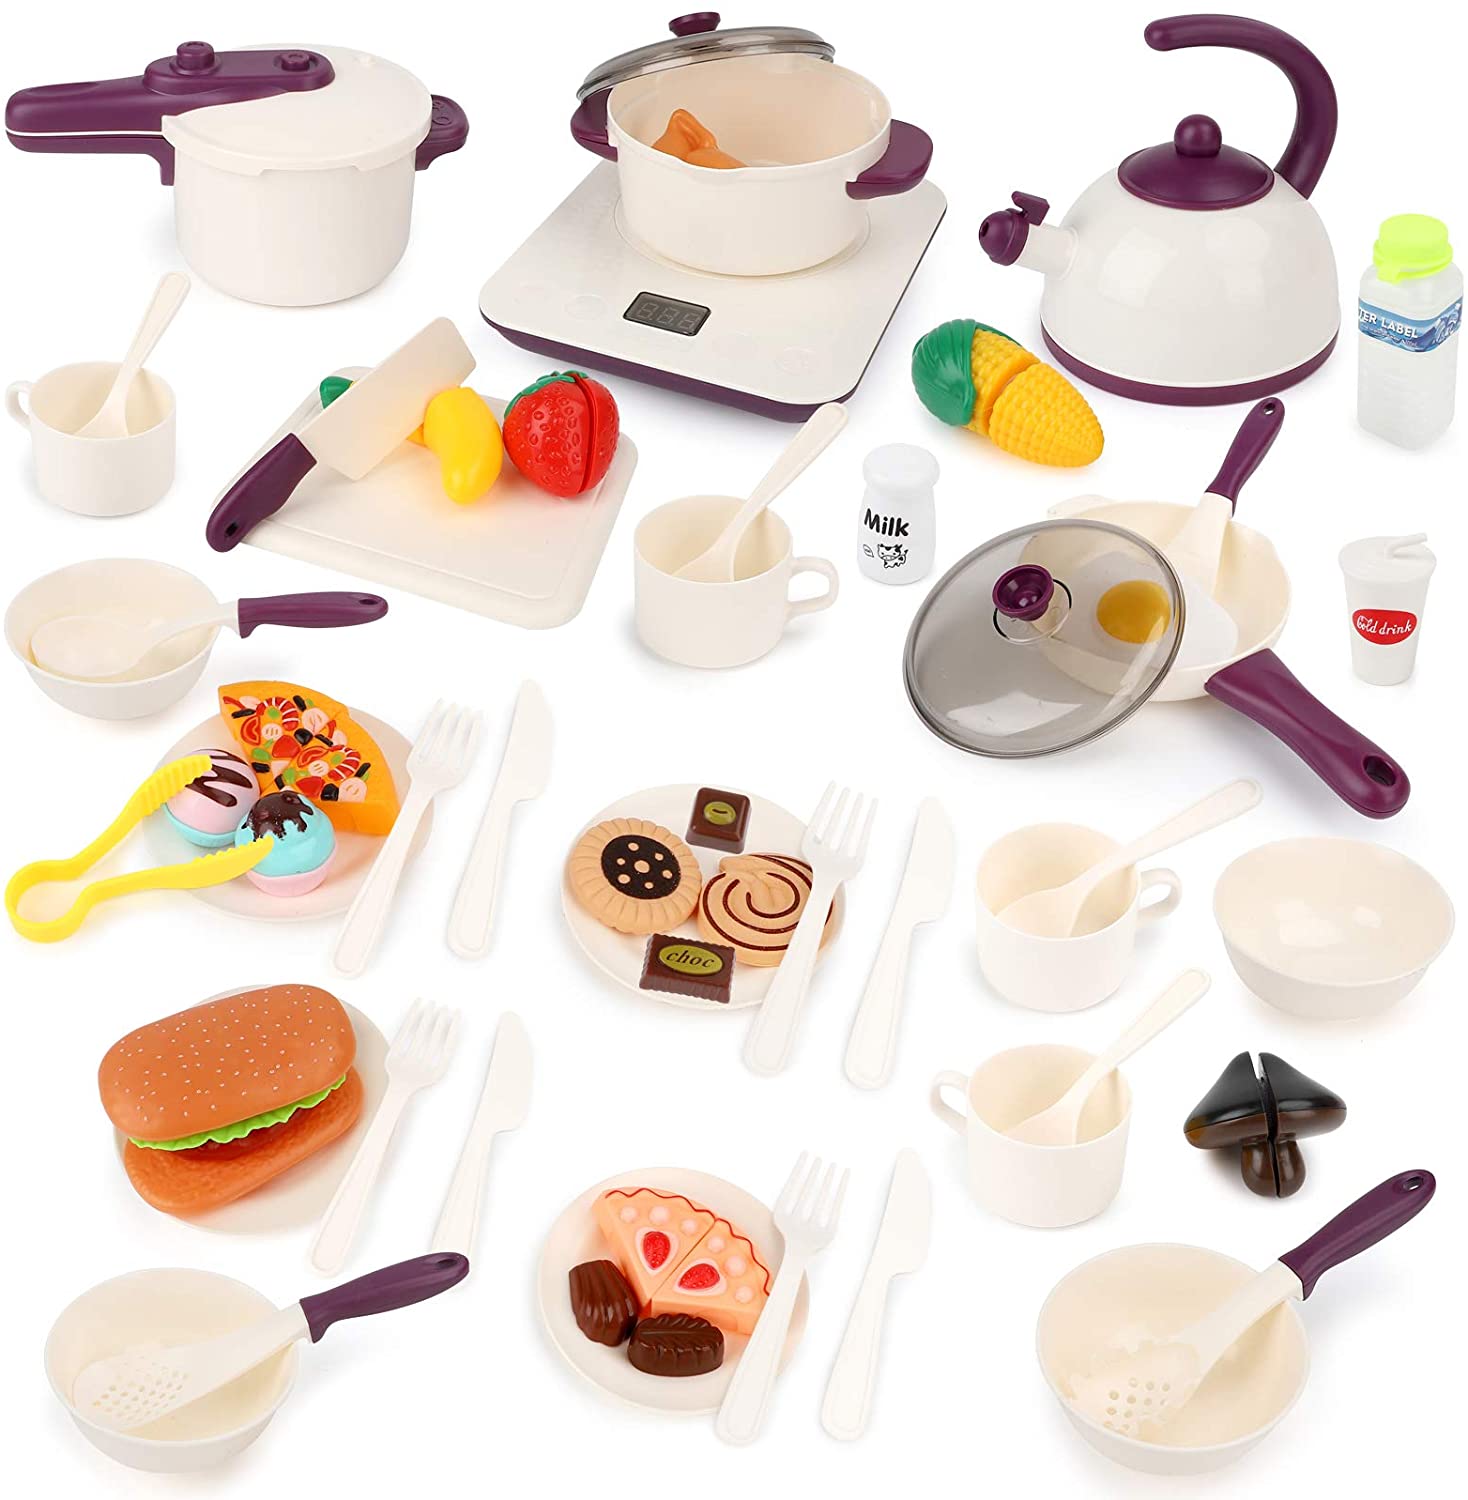 China wholesale Wooden Toys For Toddlers - BeebeeRun Kids Kitchen Pretend Play Toys 61PCS Cooking Set for Toddlers Cookware Pots and Pans Playset, Cooking Utensils, Toy Cutlery, Cutting Play Food ...